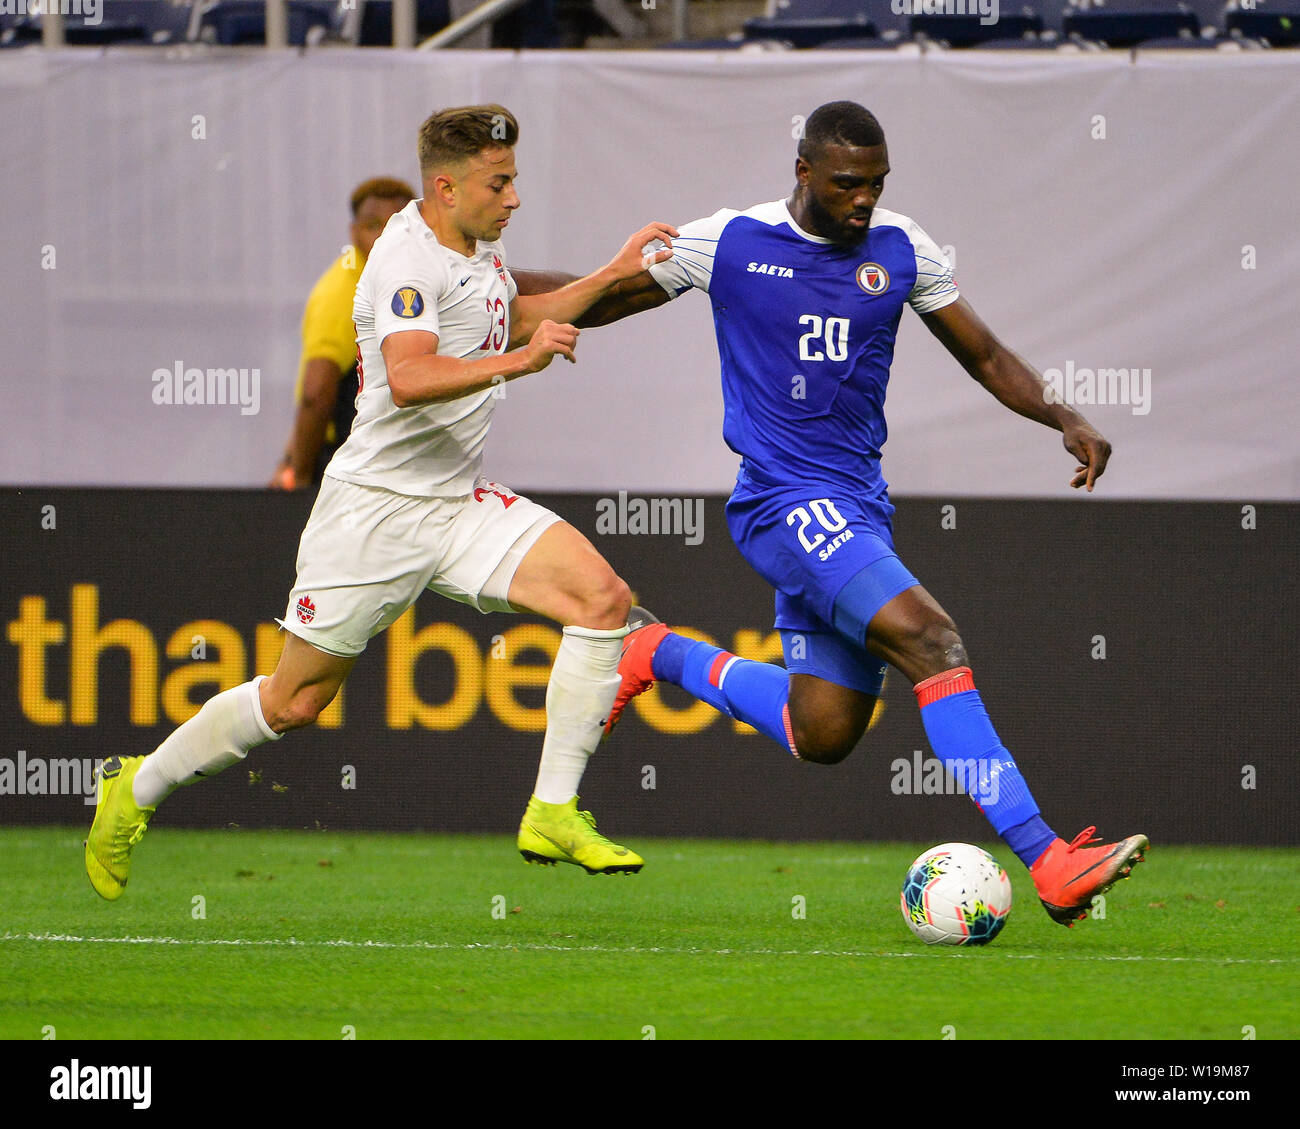 June 29, 2019: Canada defender, Marcus Godindo (23), and Haiti forward, Frantzdy Pierrot (20), work for control of the ball during the 2019 CONCACAF Gold Cup, quarter final match between Haiti and Canada, at NRG Stadium in Houston, TX. Mandatory Credit: Kevin Langley/Sports South Media/CSM Stock Photo